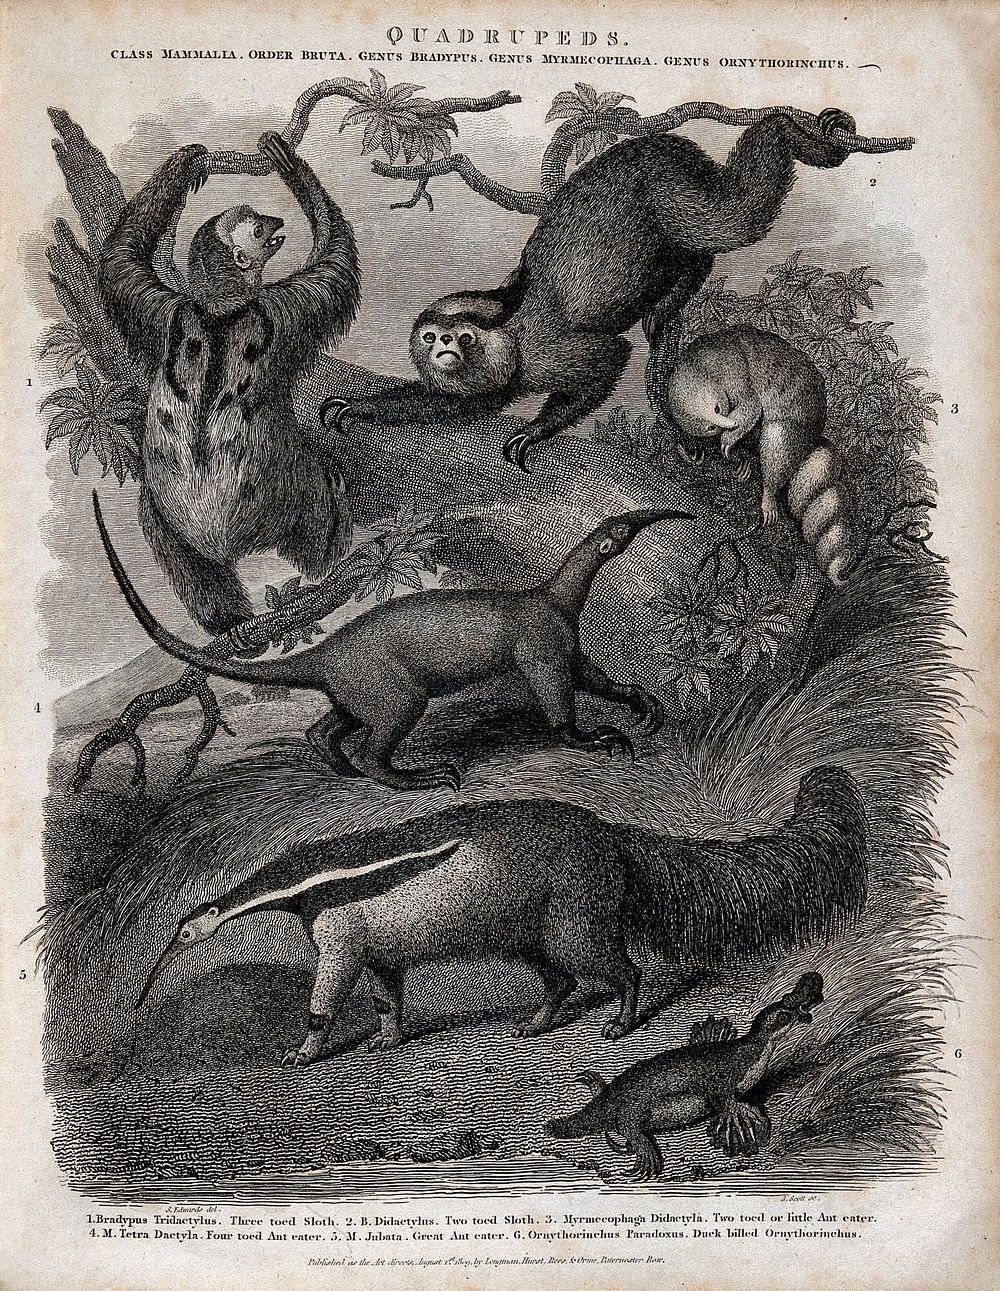 Six four-footed mammals, including sloths and ant eater. Line engraving by J. Scott after S. Edwards.